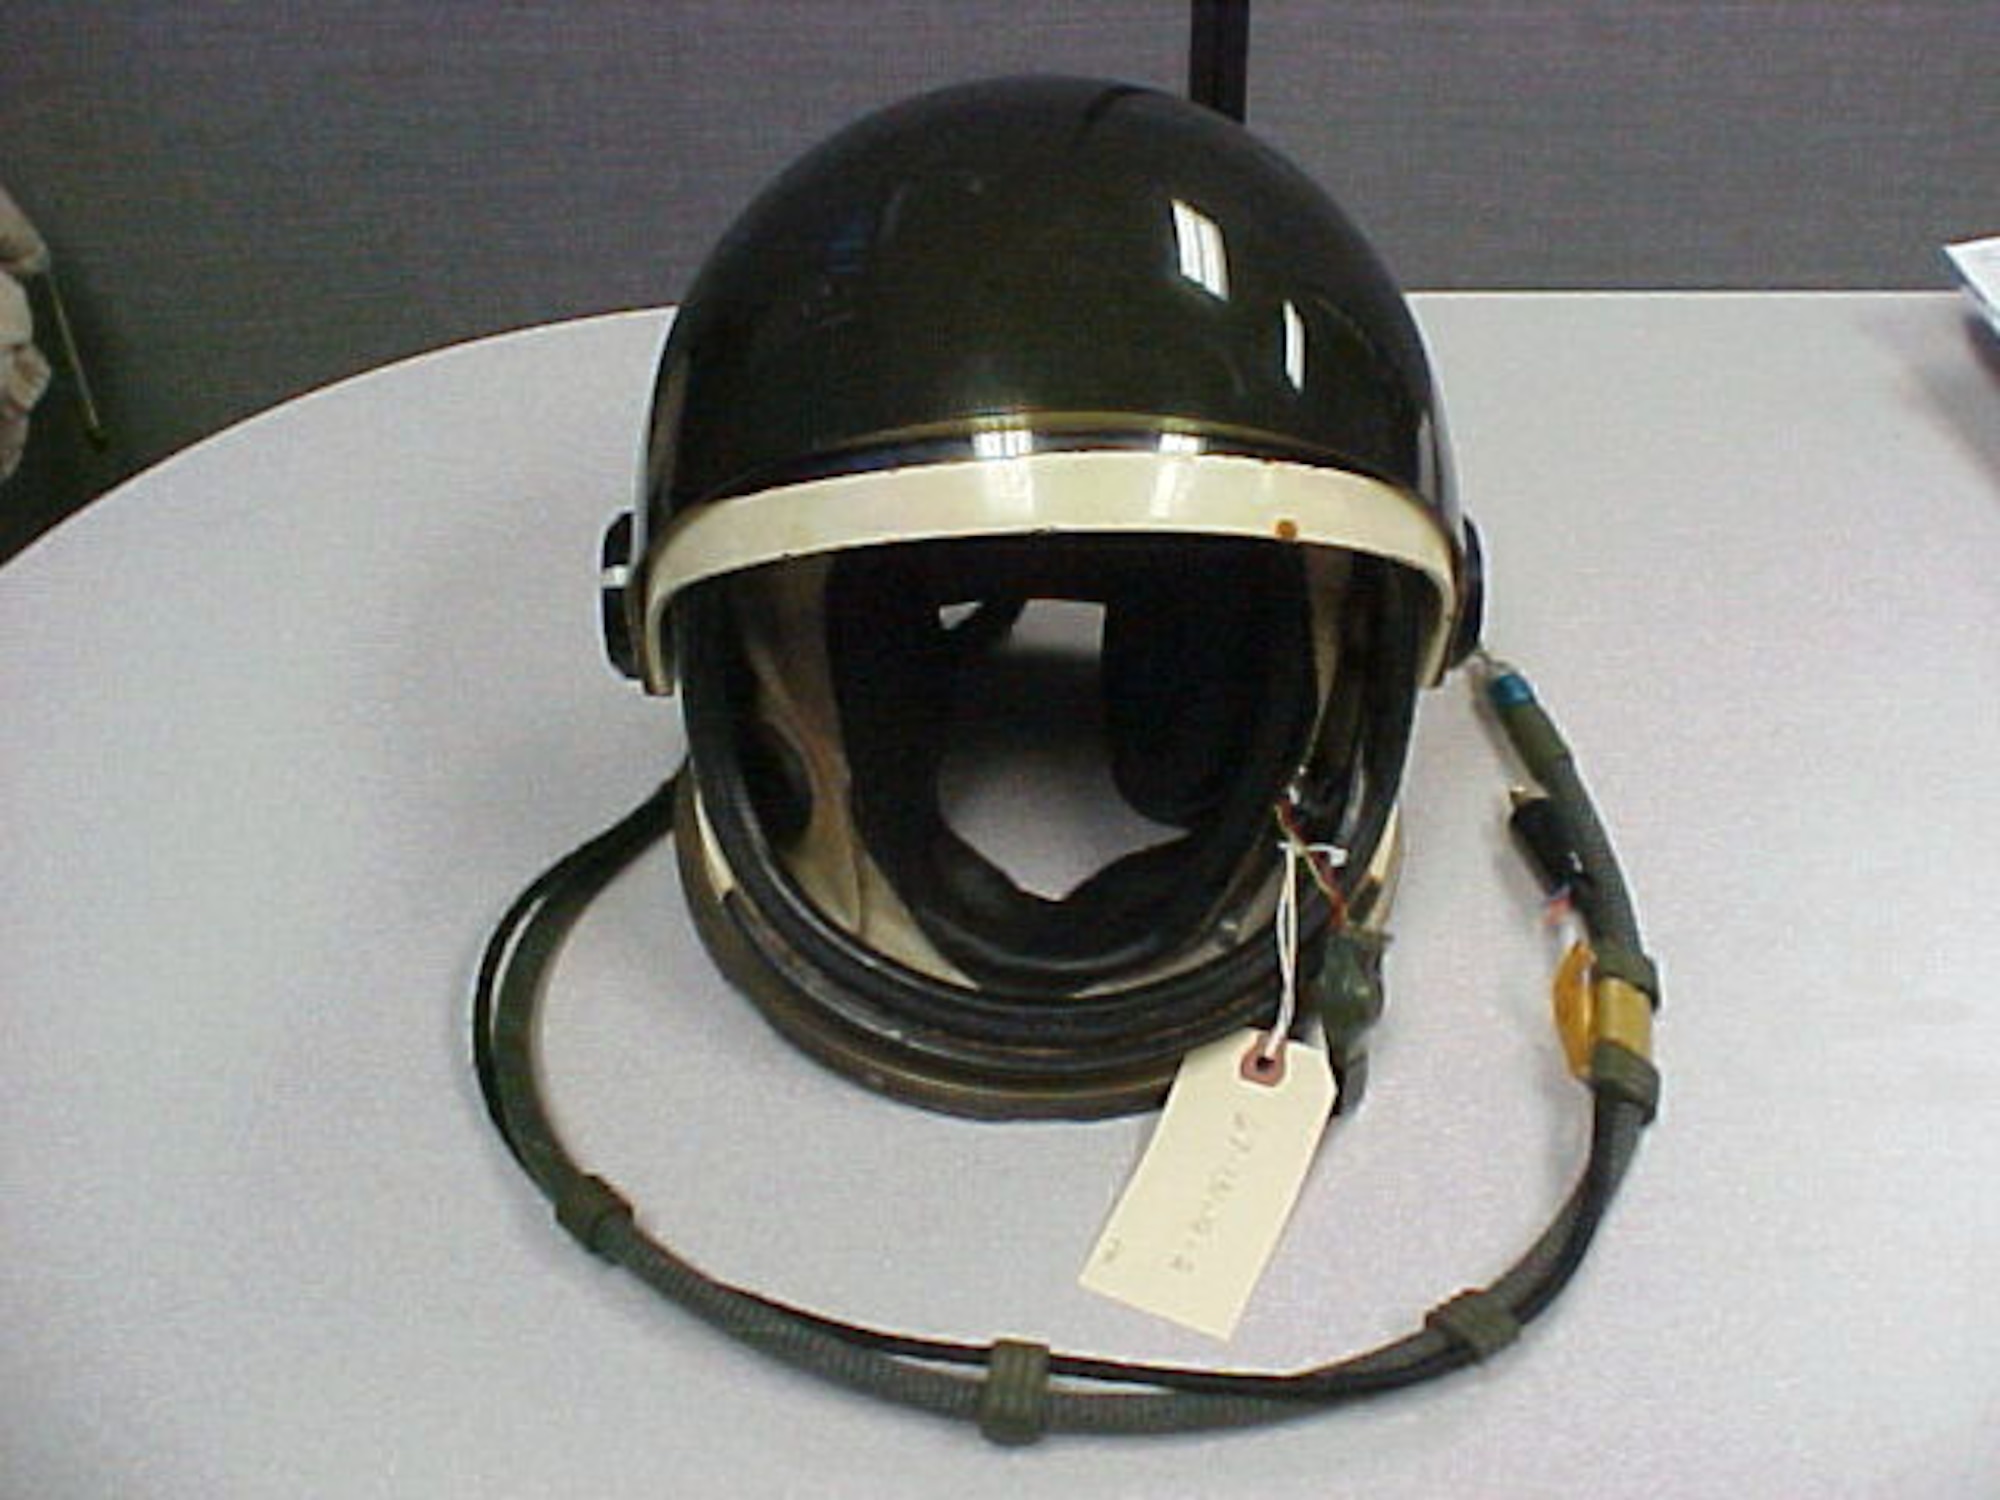 The X-15 pressure suit represented a major advance in pressure suit technology. (U.S. Air Force photo)